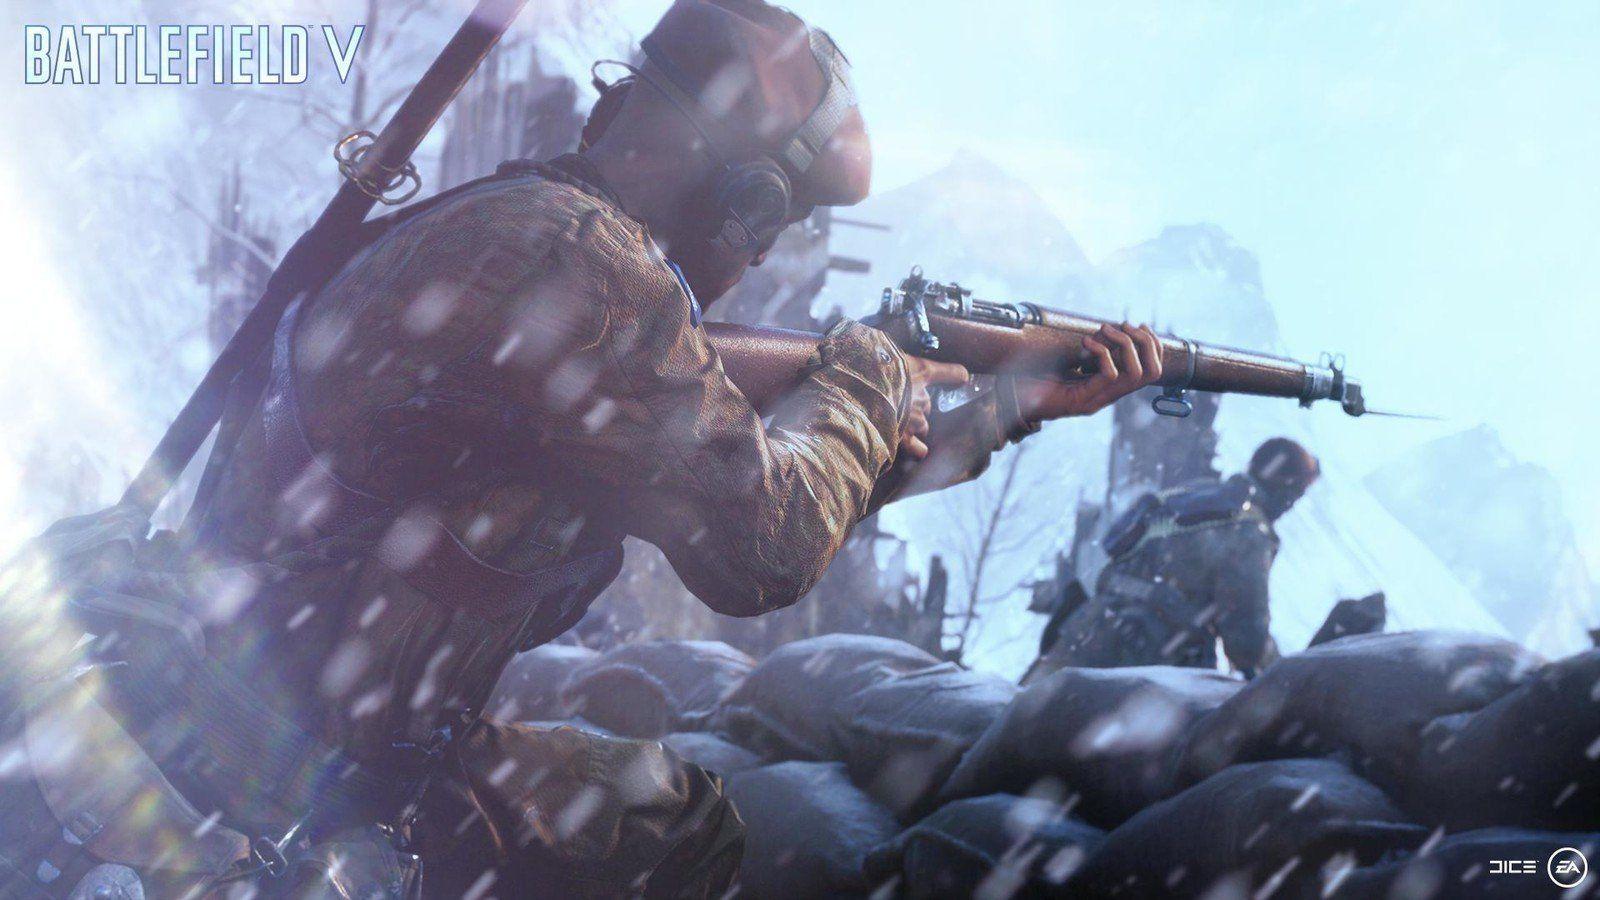 Battlefield 5: Sniper and Ground Combat Gameplay at 4K 60fps